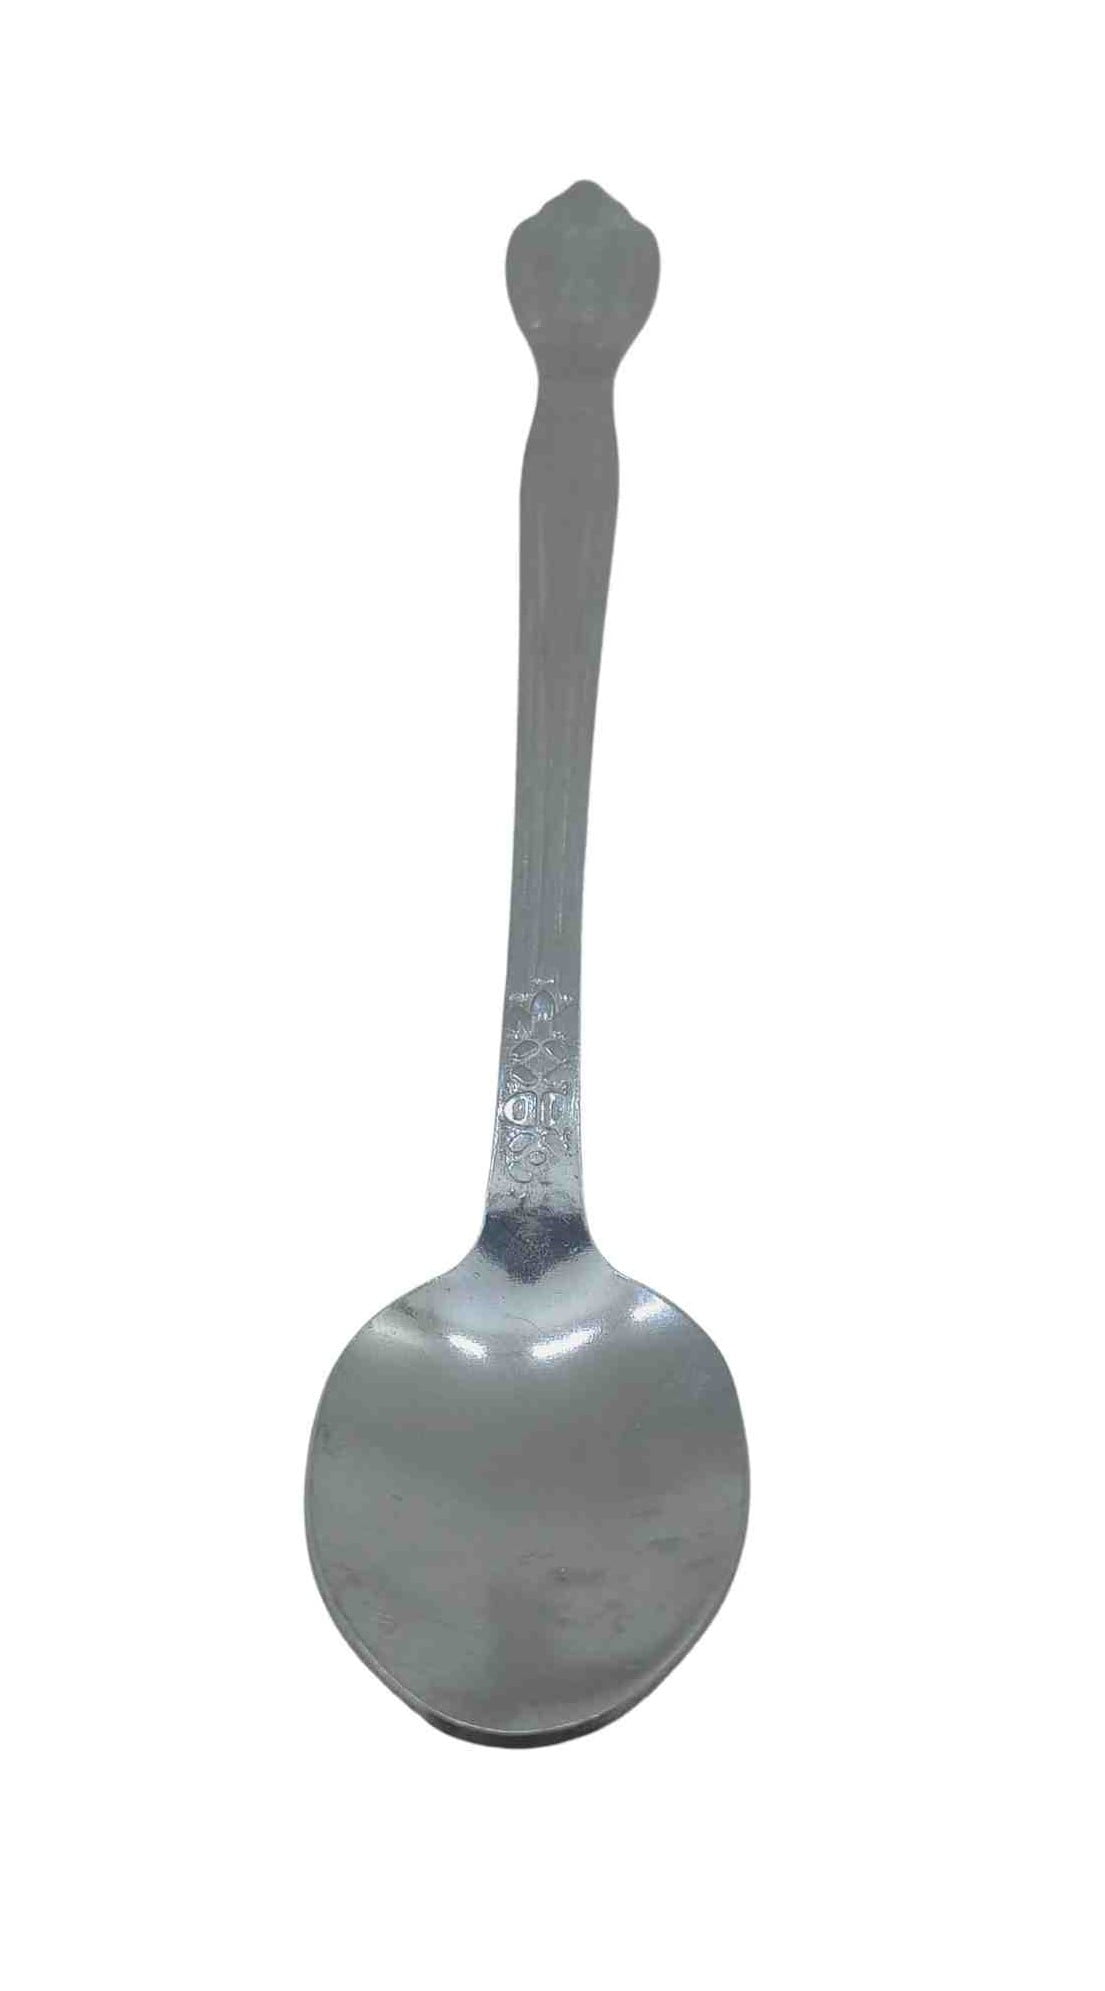 High quality premium level flower design durable juice, drinks, faluda serving spoon silver color Cutlery NowBuy.lk 5